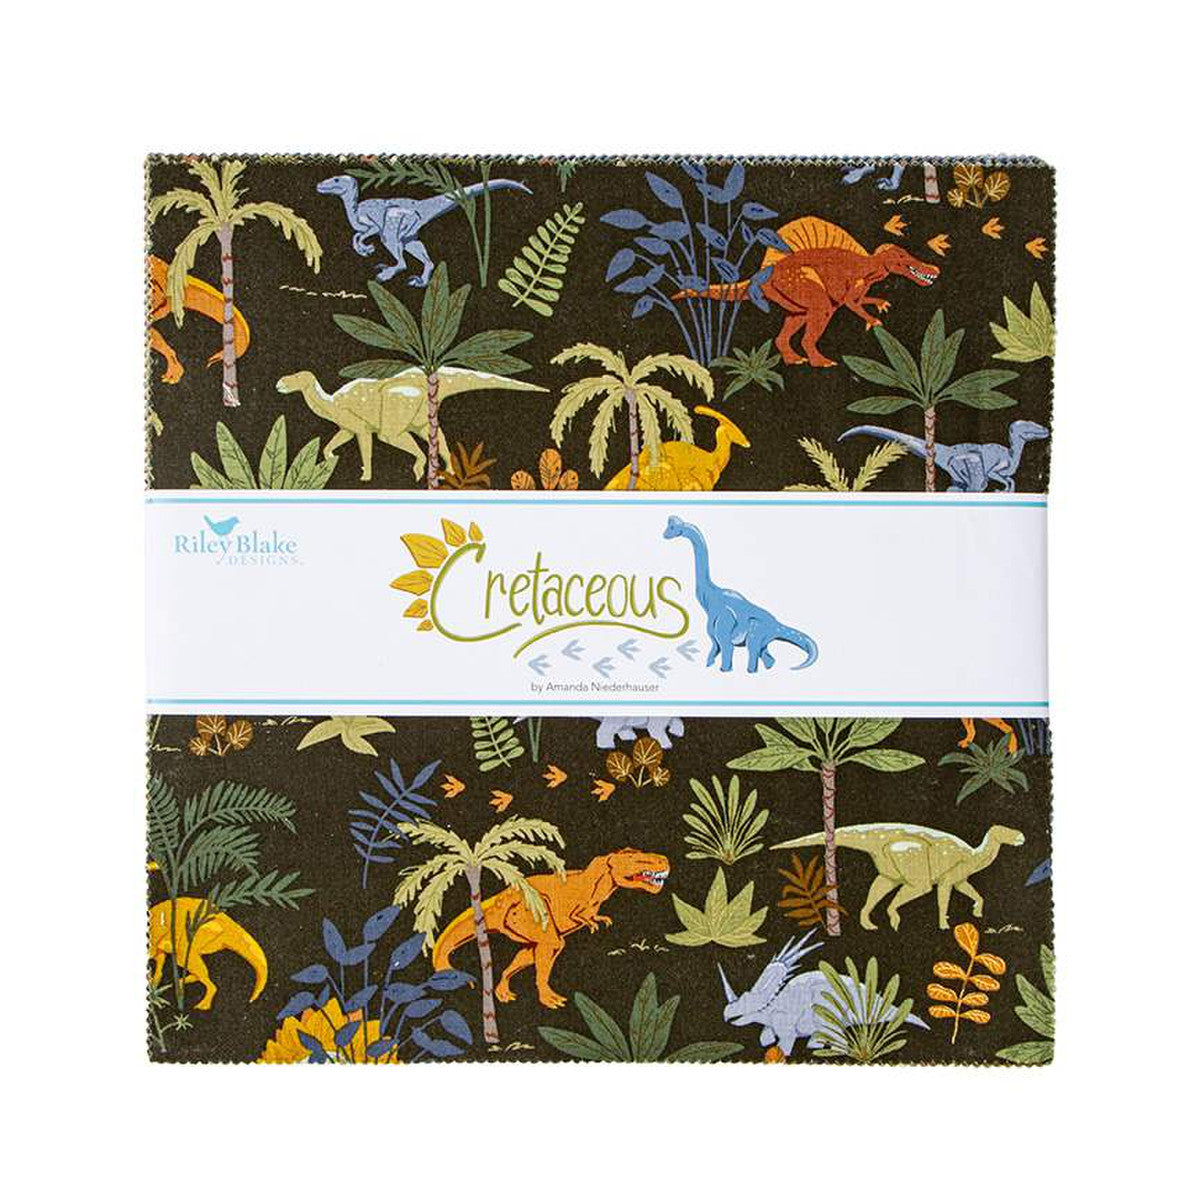 Cretaceous Quilt Kit with Fabric and Pattern by Amanda Neiderhauser